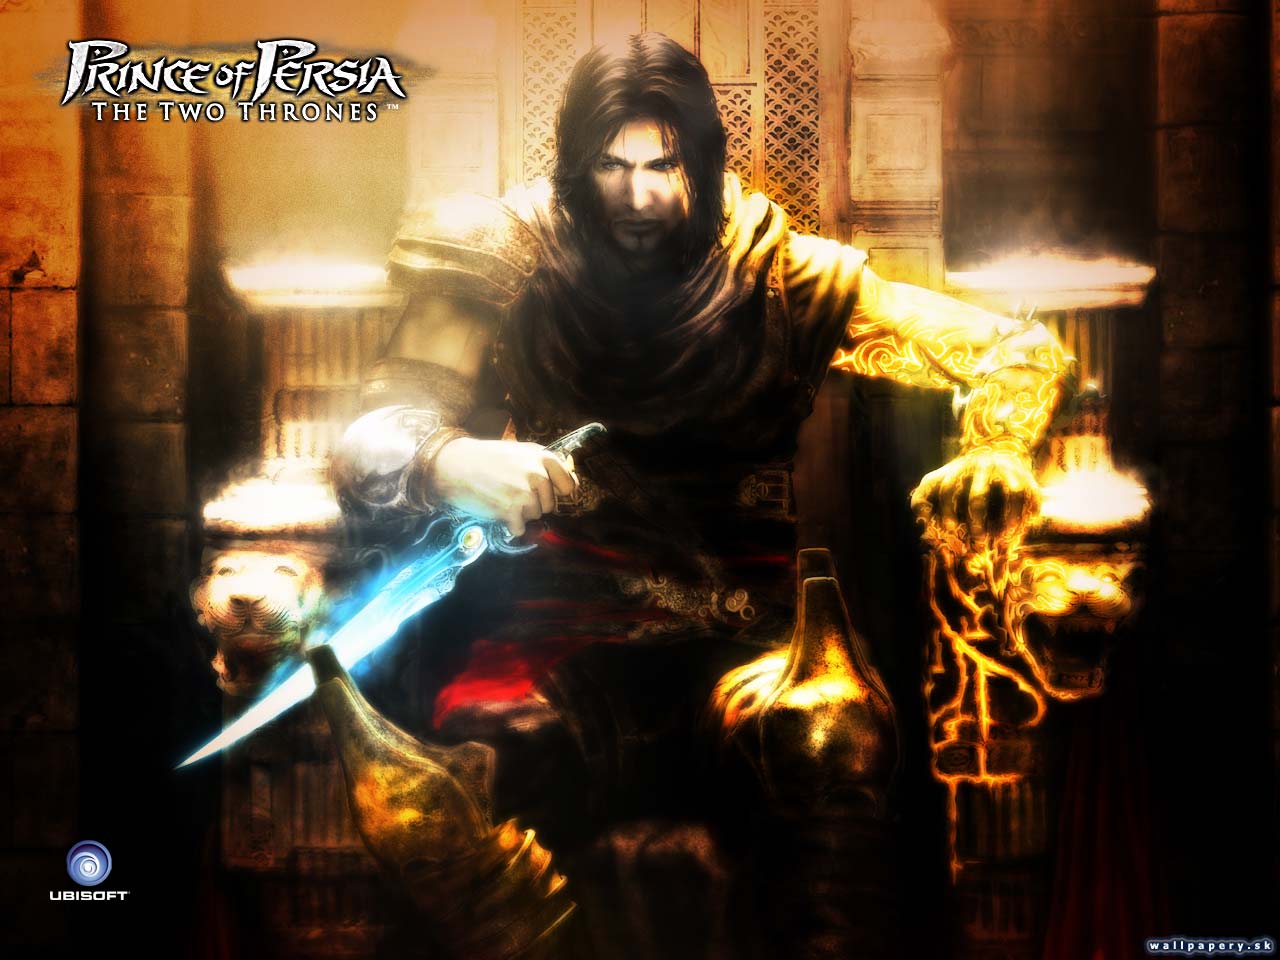 Prince of Persia: The Two Thrones - wallpaper 3